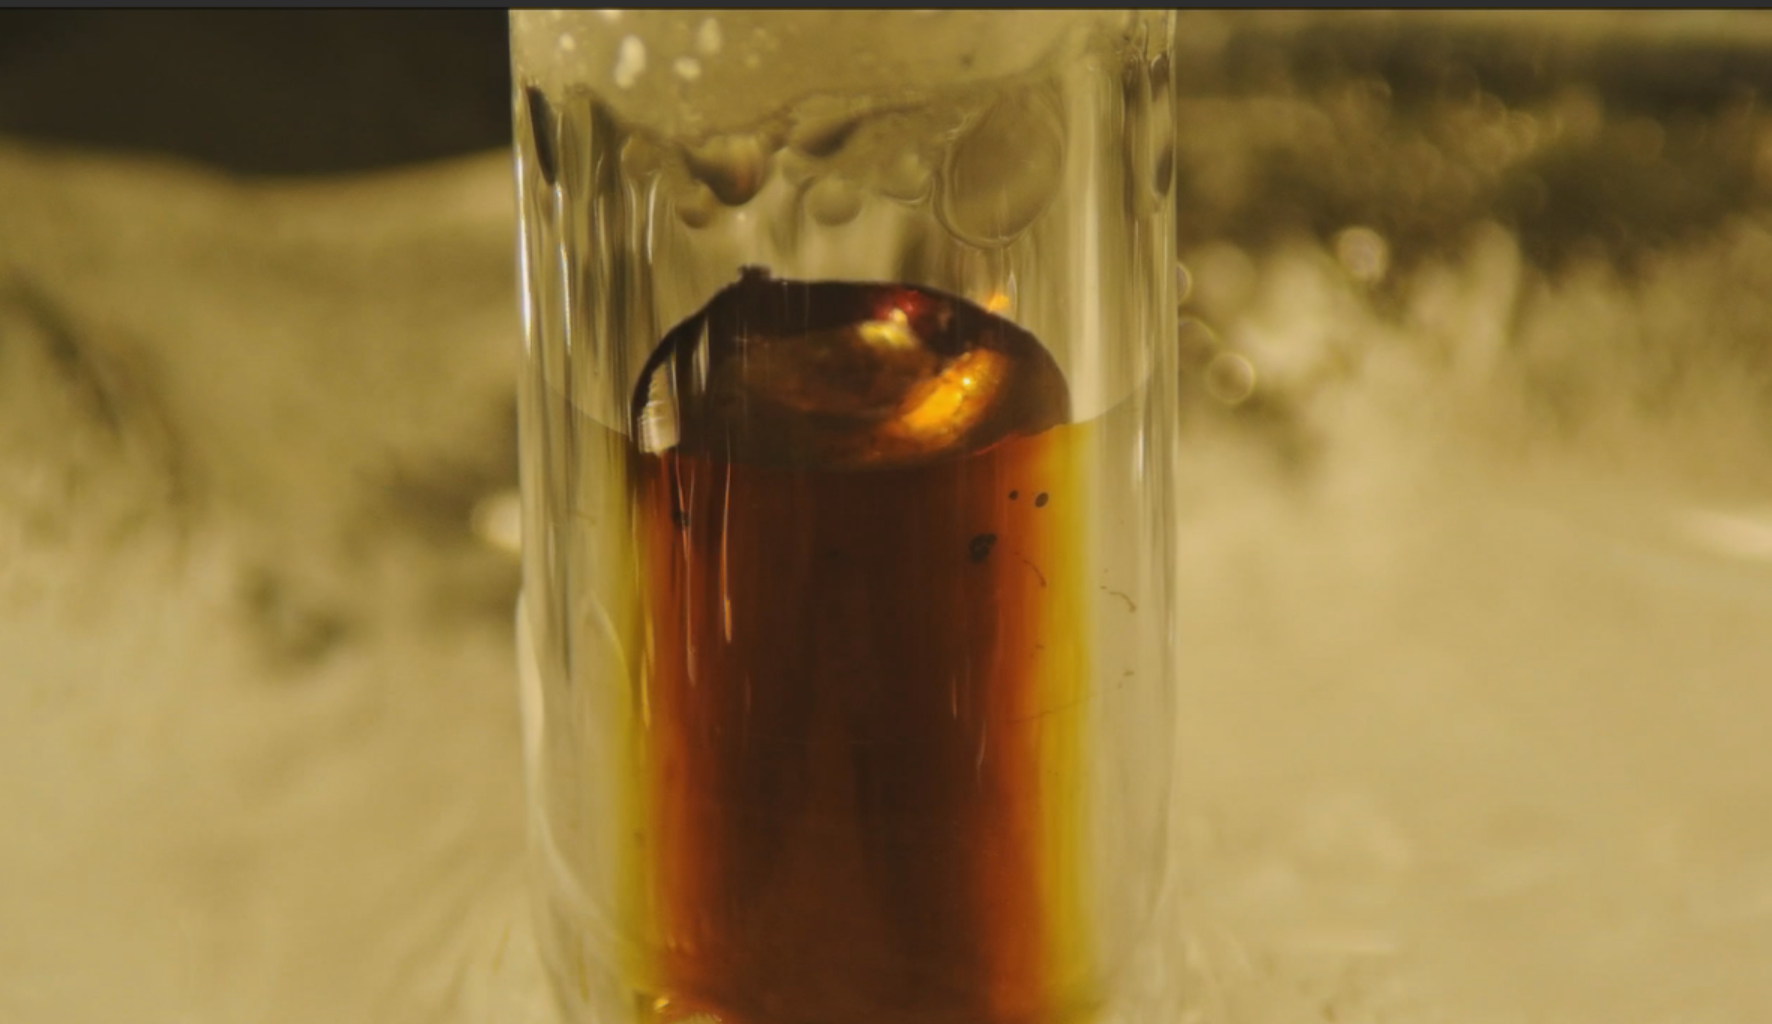 Gold colored metallic solution with higher concentration of excess electrons